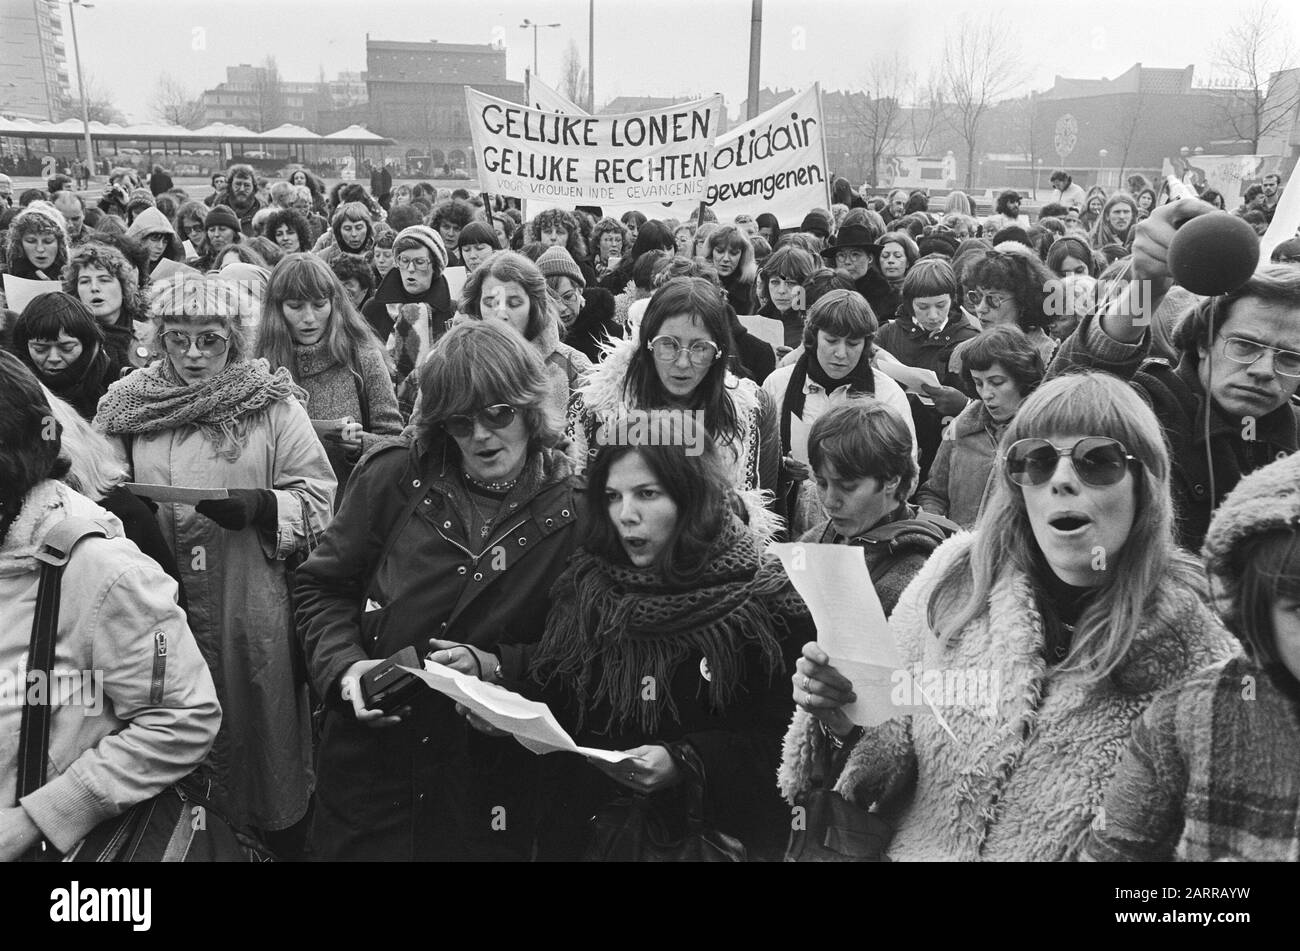 Rotterdam, demonstration for better care, treatment and guidance of women in prison Date: 4 February 1978 Location: Rotterdam, Zuid-Holland Keywords: demonstrations Stock Photo